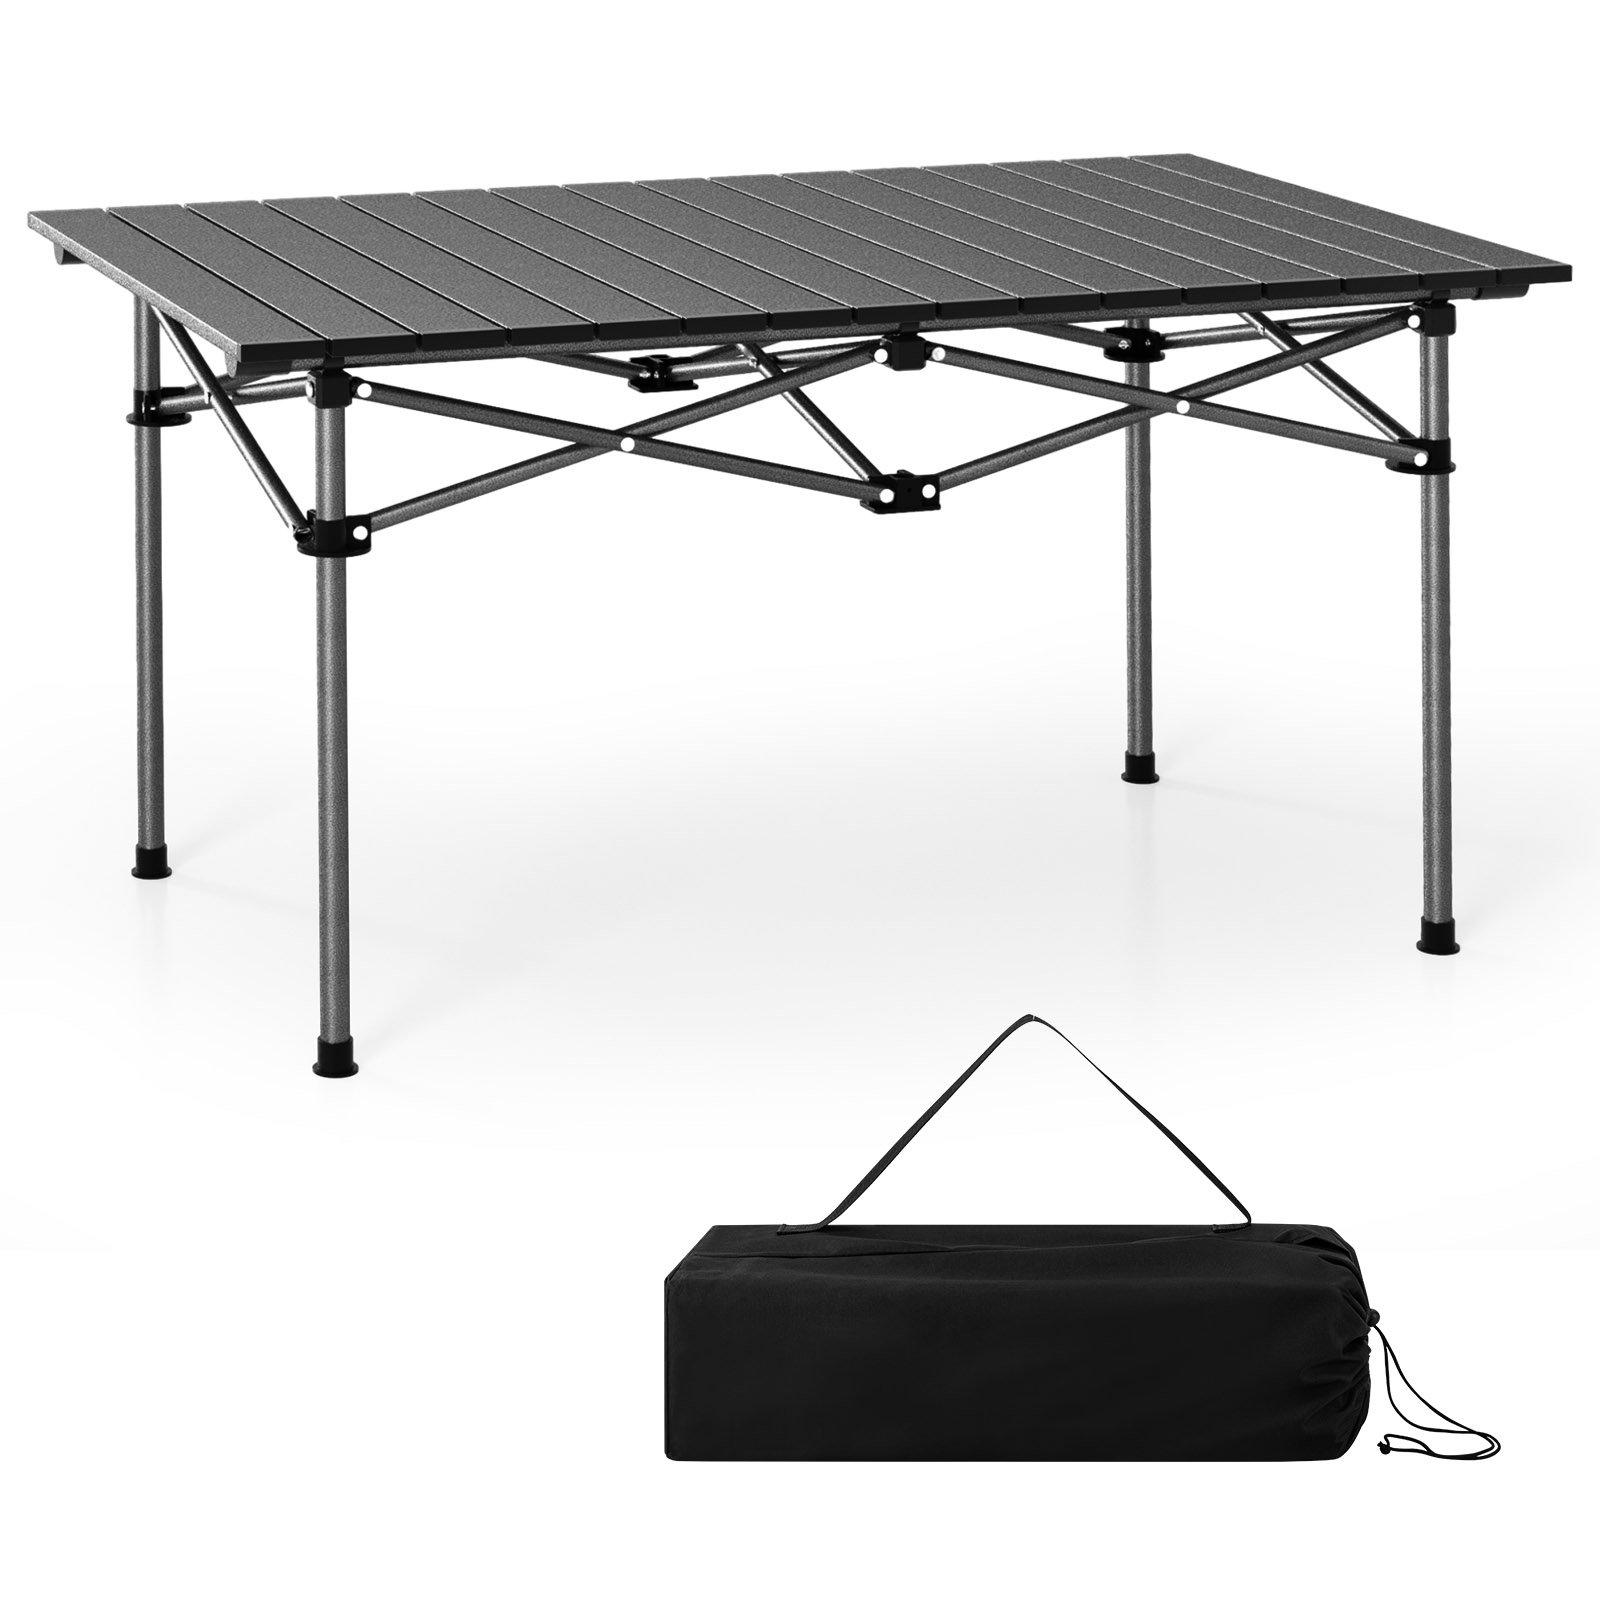 Aluminum Folding Camping Table Roll Up Portable Picnic Table with Carrying Bag